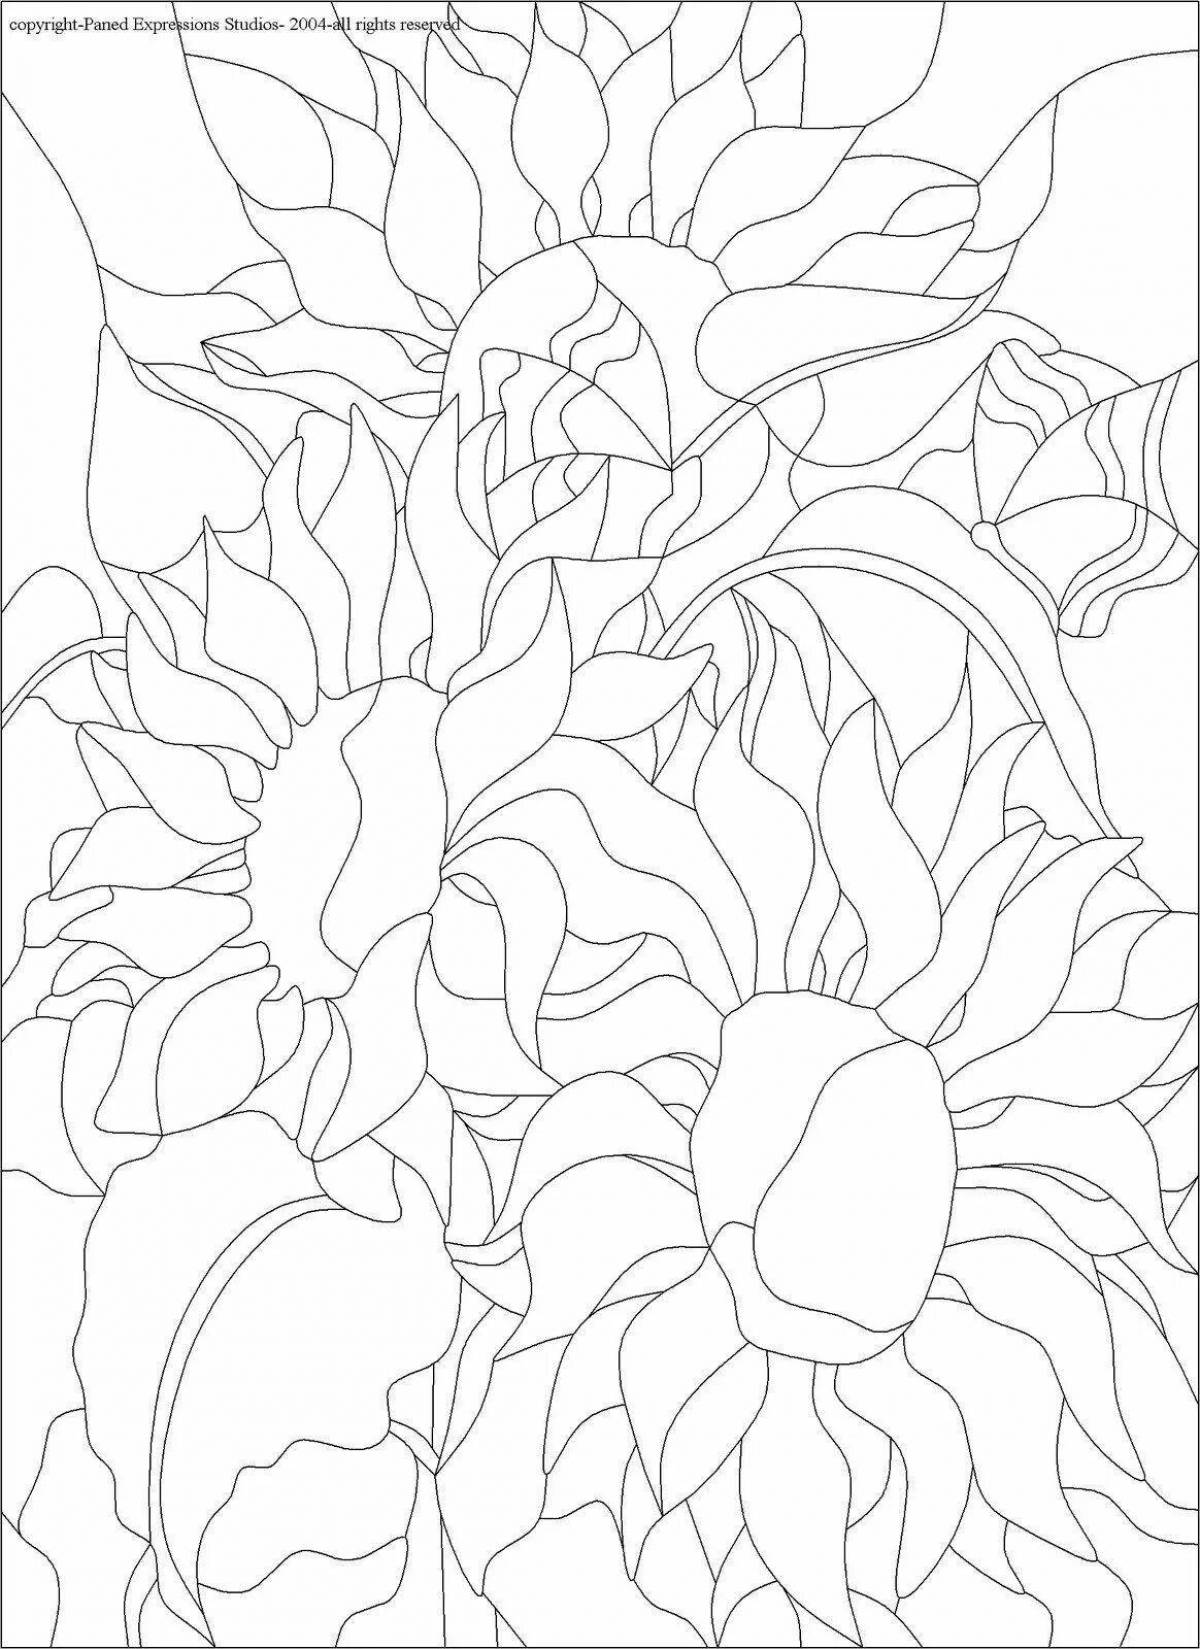 Acrylic paint coloring page with amazing shine